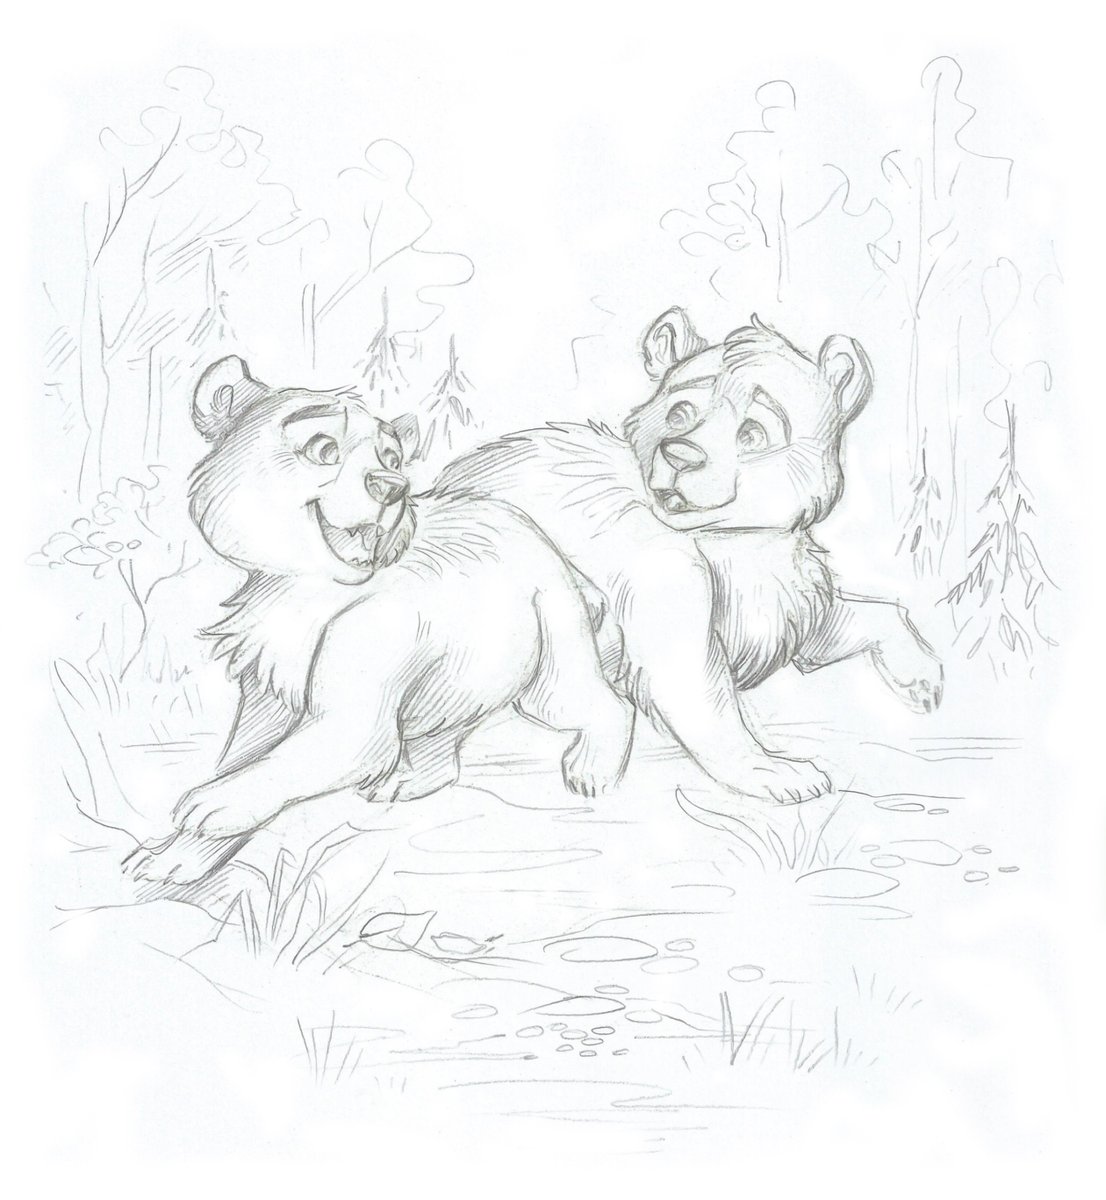 Sketch for the short story “Winter unrest' by Nikolay Bautin.

This is the story about restless bear cubs, which ran off for adventures, because winter rest is too boring.
#bear #pencildrawing #bearcub #pencilart #childrensbookart #childrensbook #animalart #bears #forest #sketch